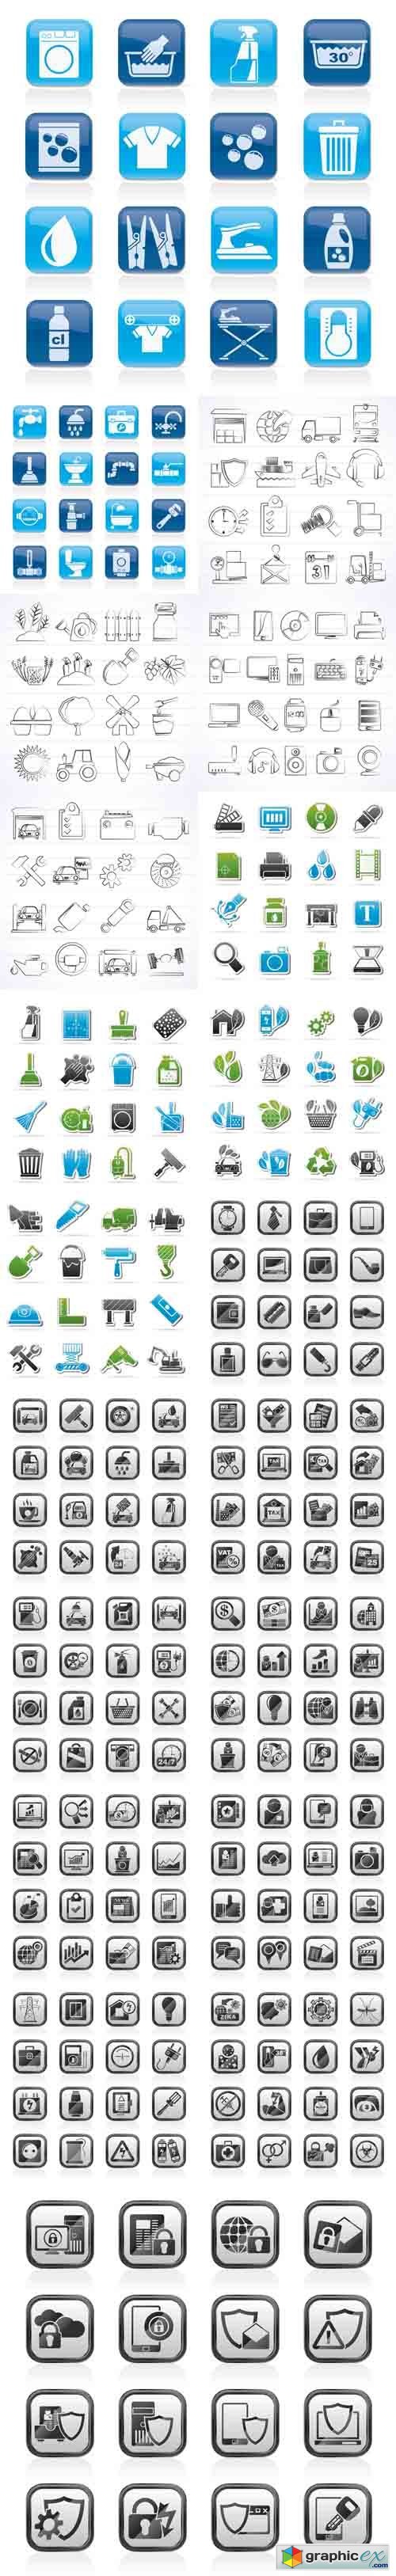 20 Different Icons Mix 2